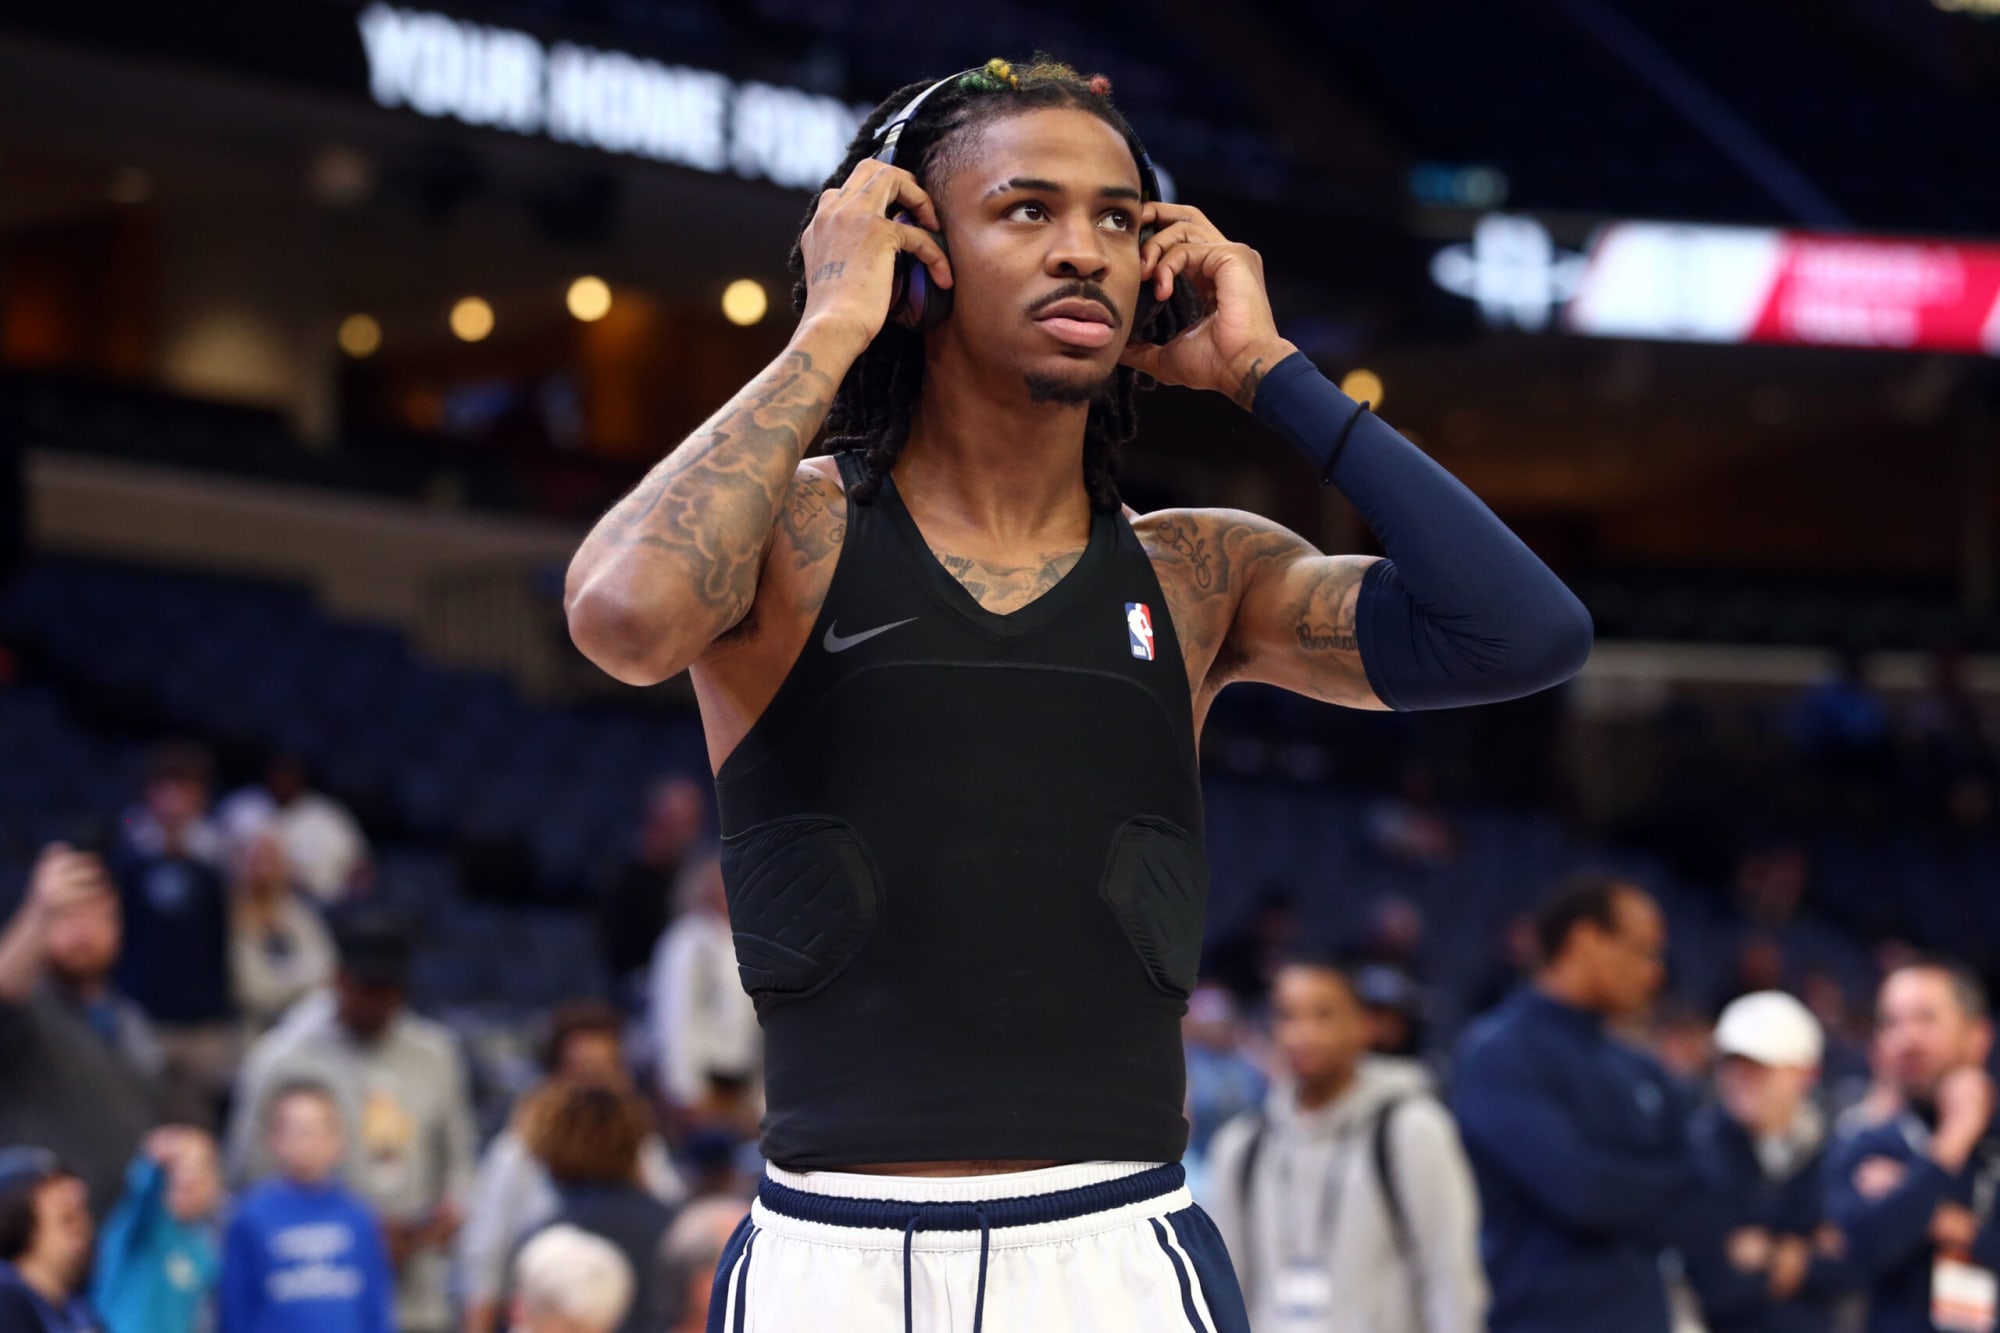 Grizzlies star Ja Morant issues statement on overcoming ‘outside’ distractions